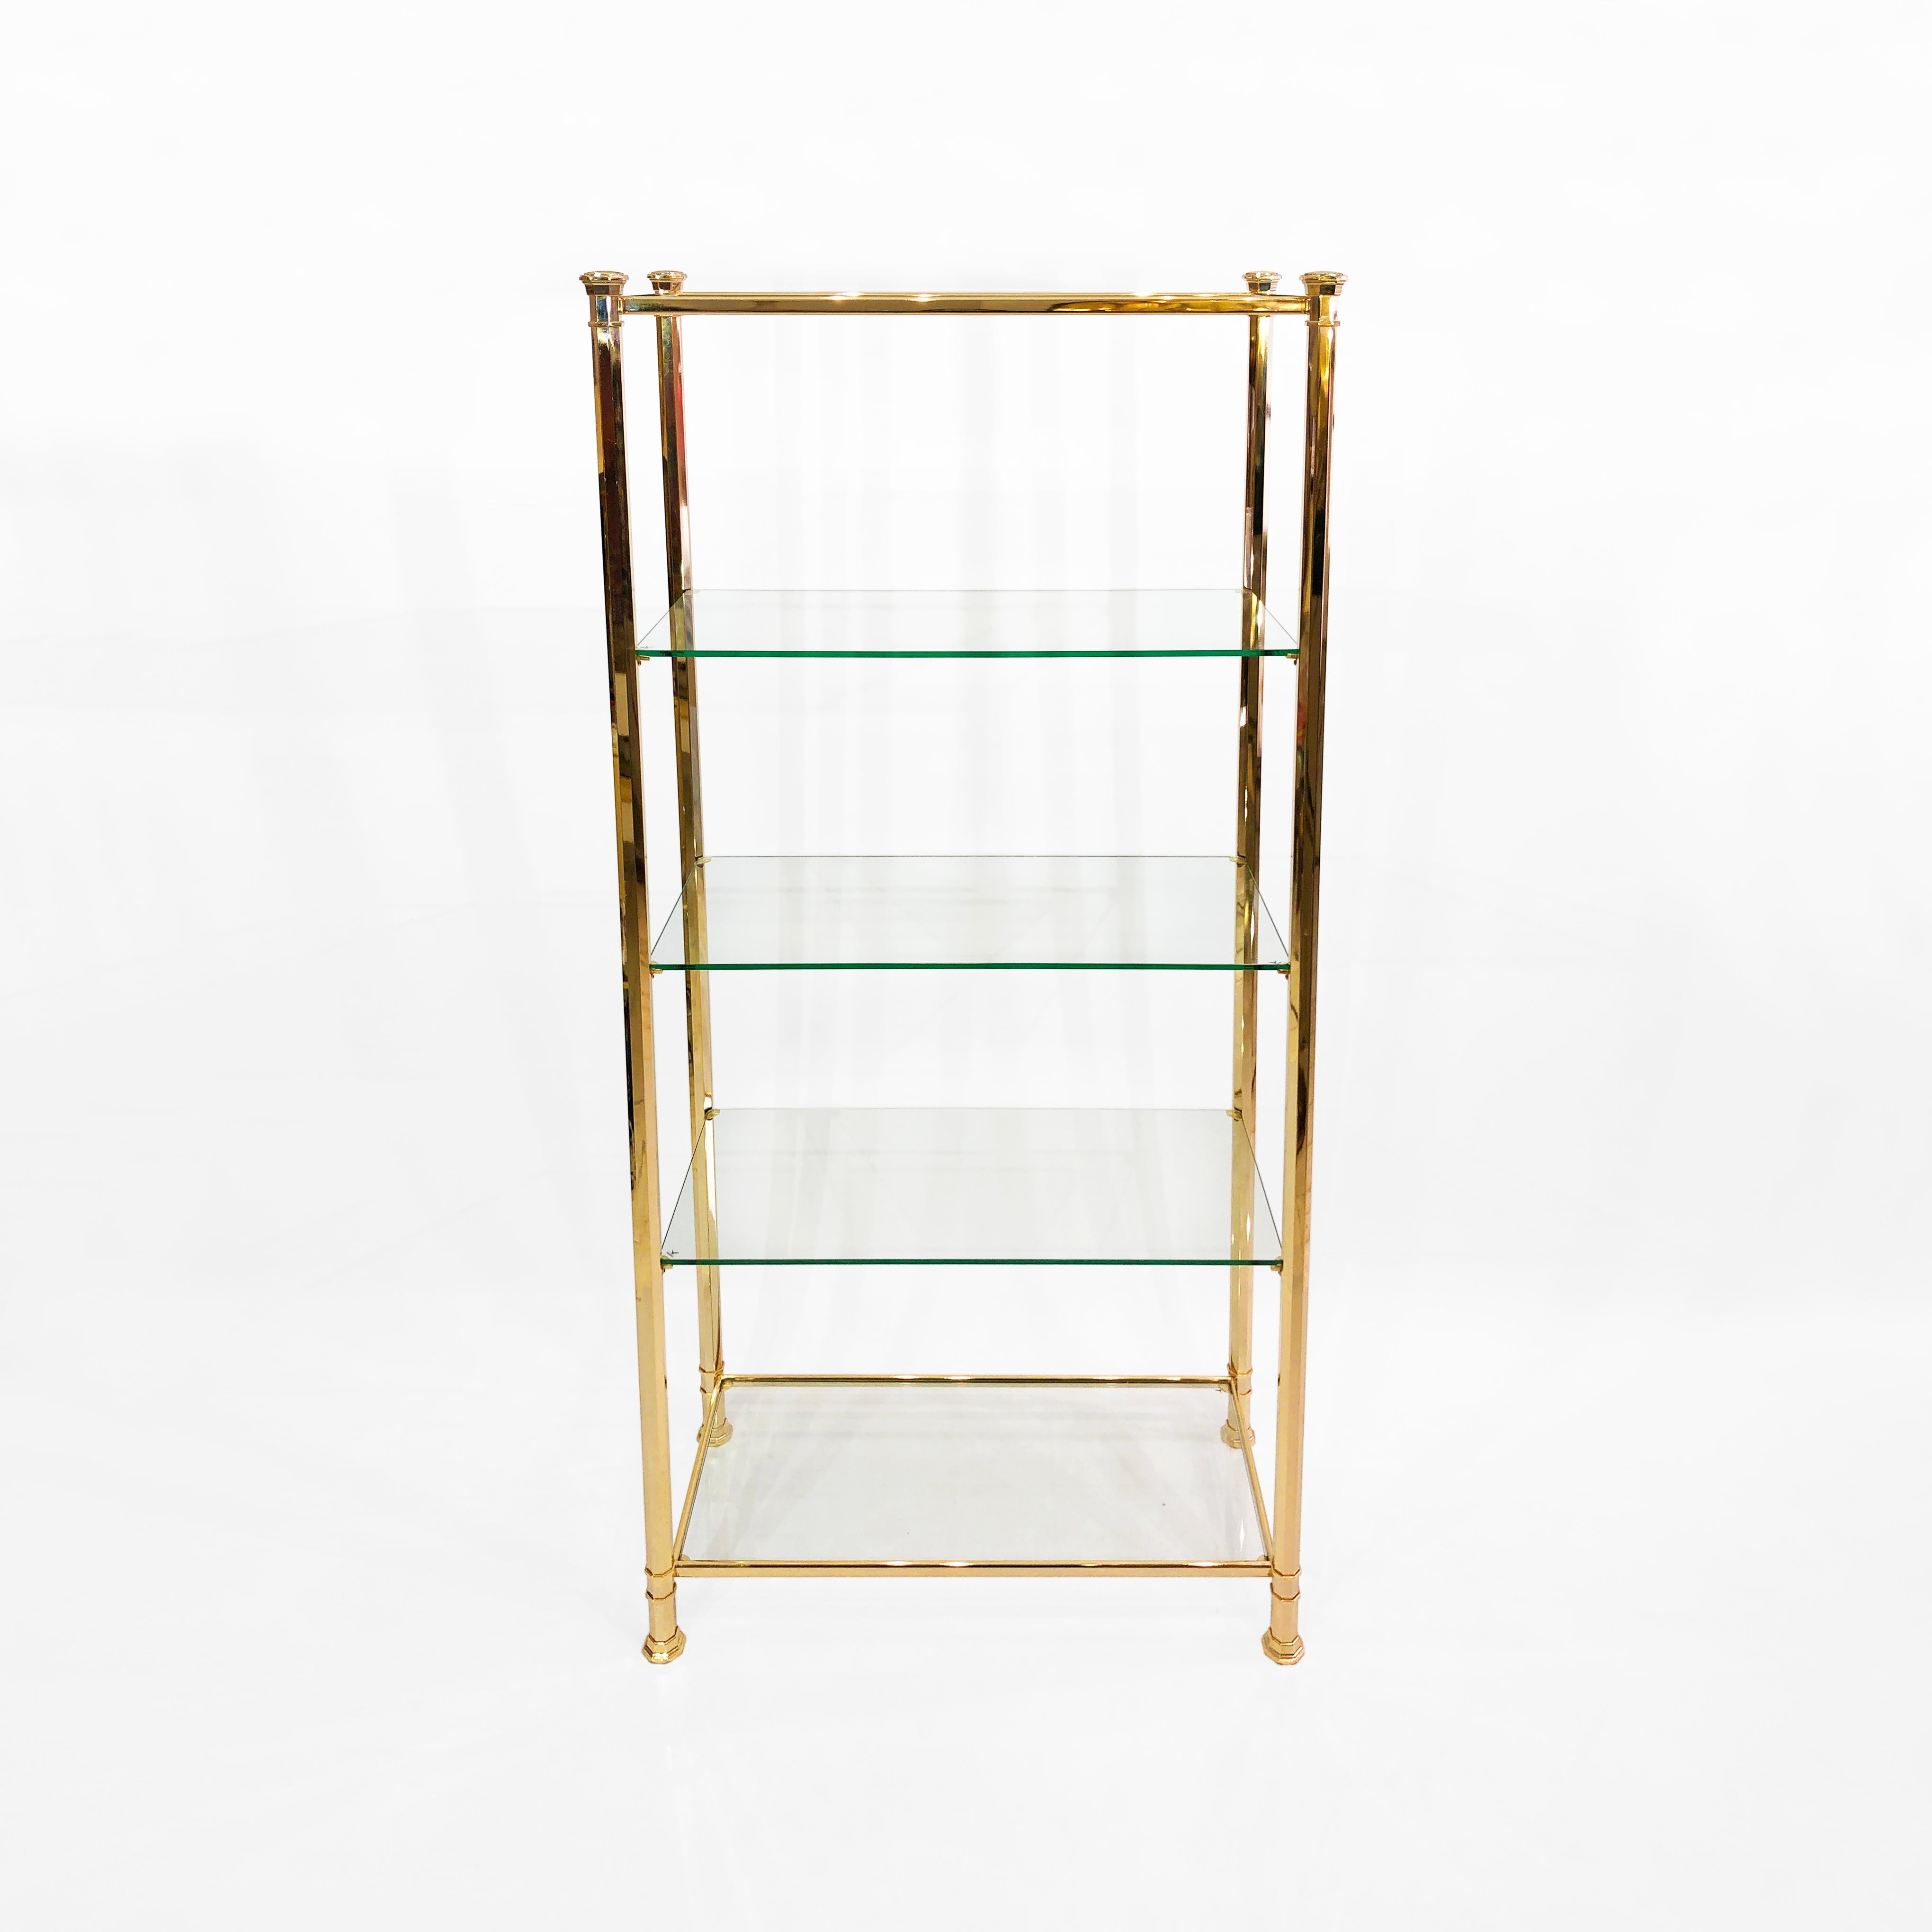 This tall étagère, manufactured in an elegant polygonal brass by Kesterport, is an excellent example of the Hollywood Regency opulence of the 1970s. A brass frame with regal corner details supports five floating glass shelves, making it ideal for